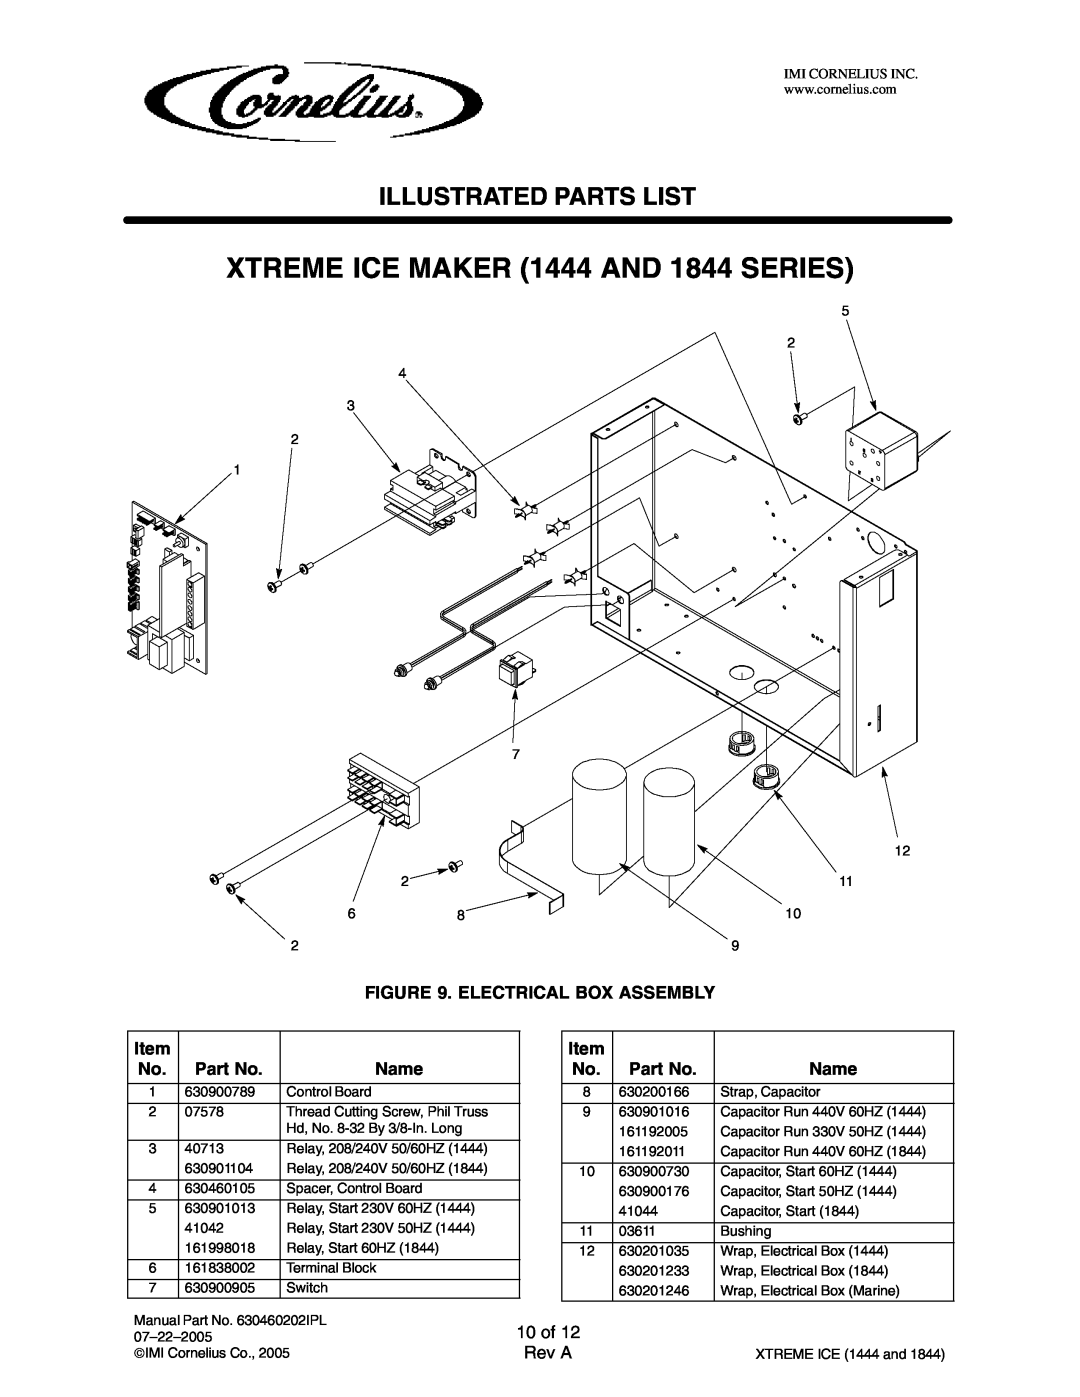 Cornelius 631818051 Electrical Box Assembly, 10 of, XTREME ICE MAKER 1444 AND 1844 SERIES, Illustrated Parts List, Name 